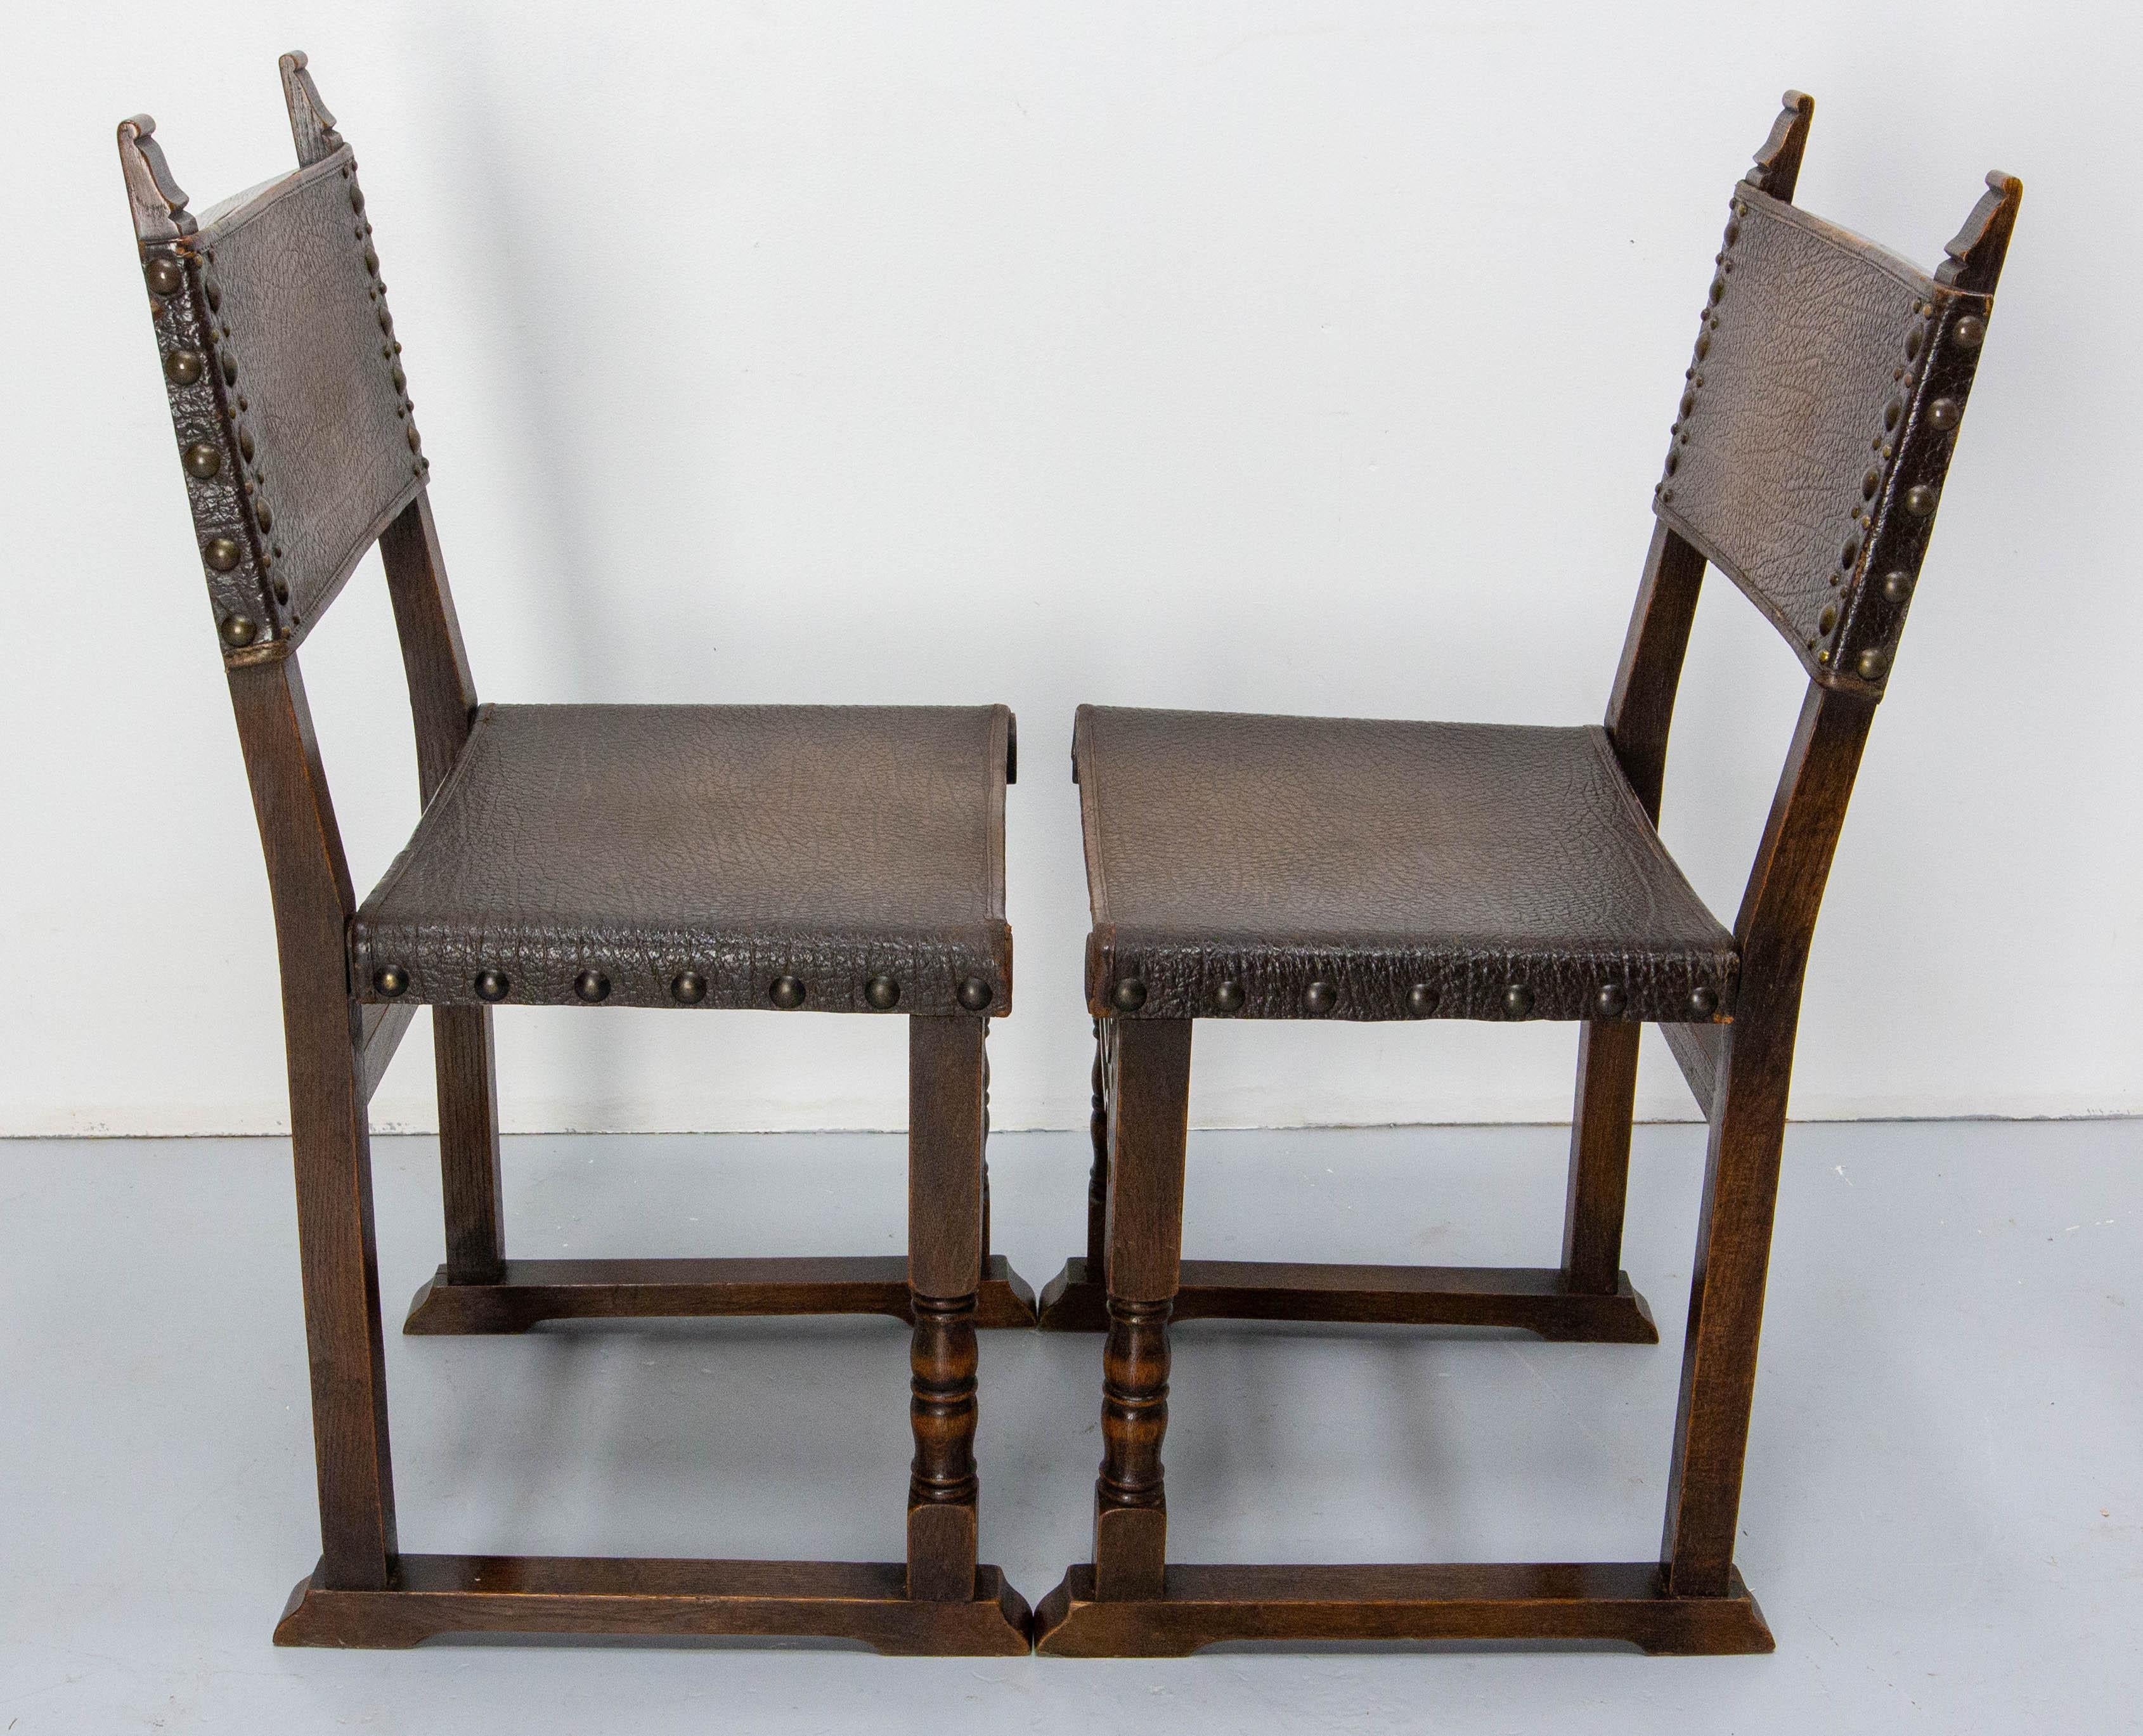 Six Dining Chairs Antique Mid-20th Century Spanish Studs Leather & Chestnut 4